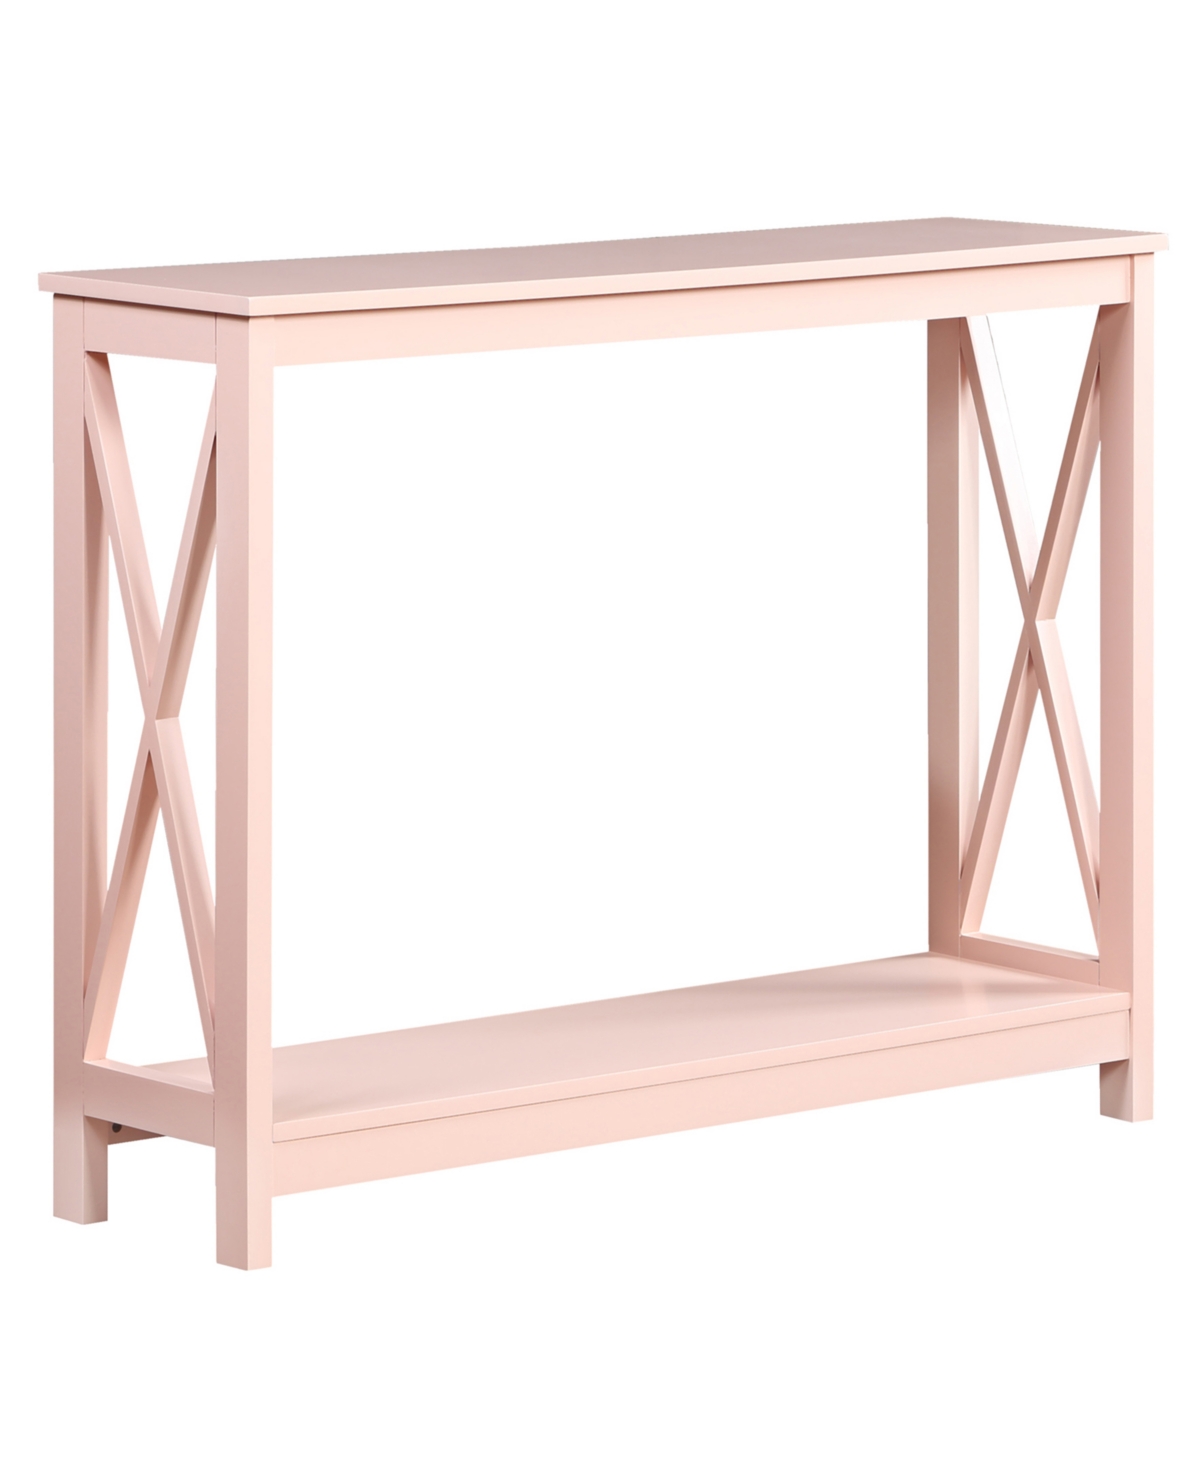 Convenience Concepts 39.5" Mdf Oxford Console Table With Shelf In Blush Pink